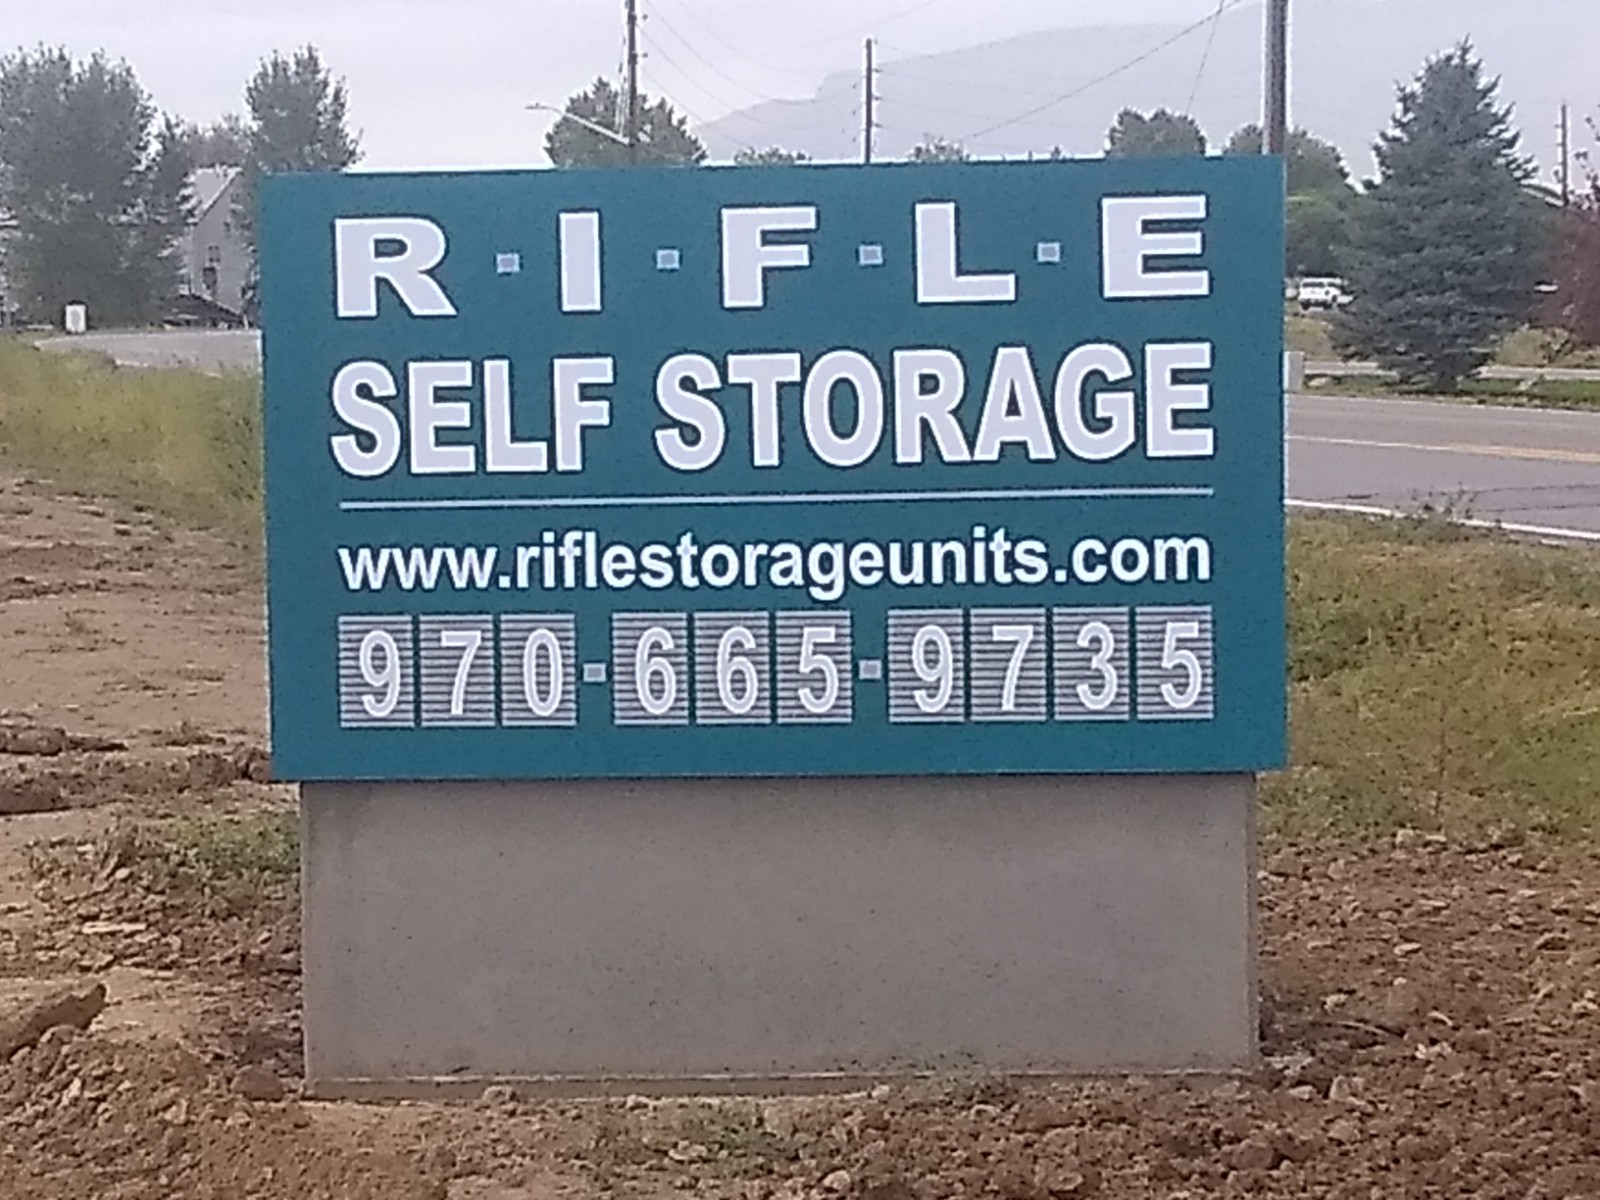 rifle self storage  located at 1889 Airport Road. Rifle, CO 81650